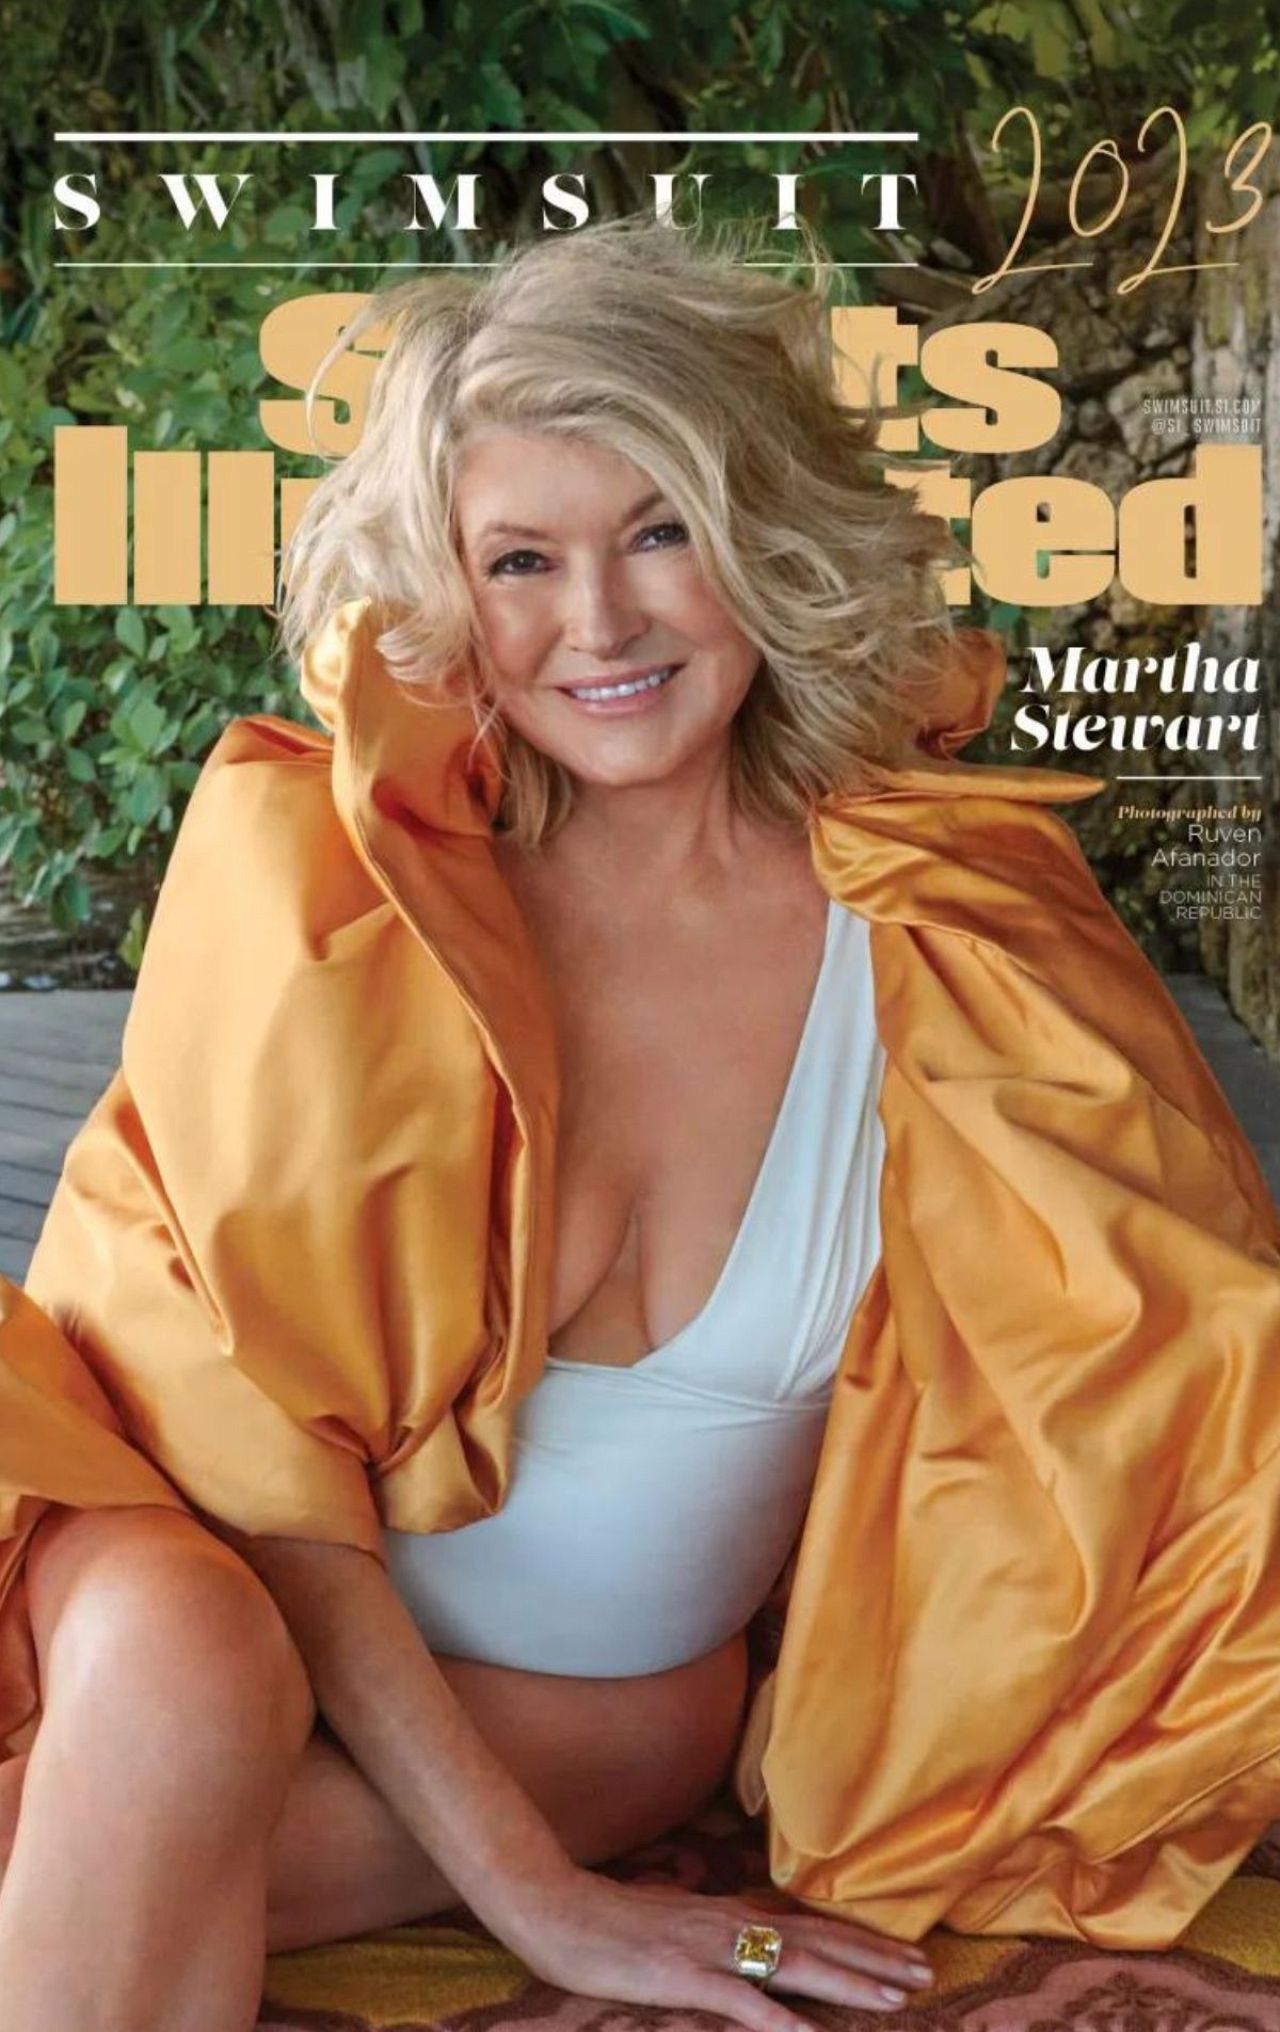 Martha Stewart, at 81 years old, has made history as the oldest person to pose for the Sports Illustrated swimsuit cover.